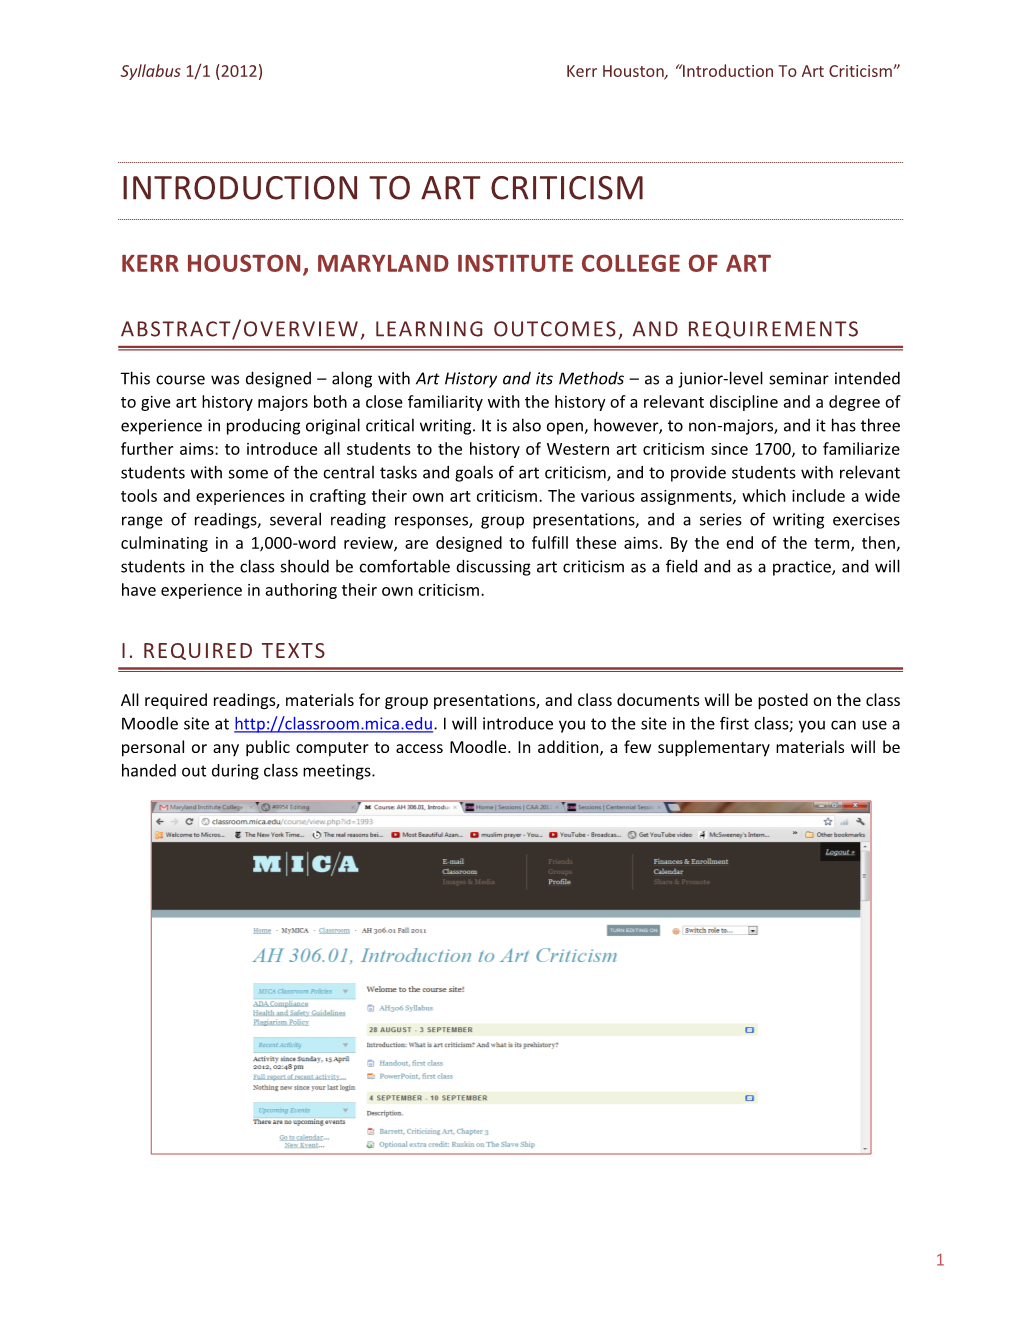 Introduction to Art Criticism”